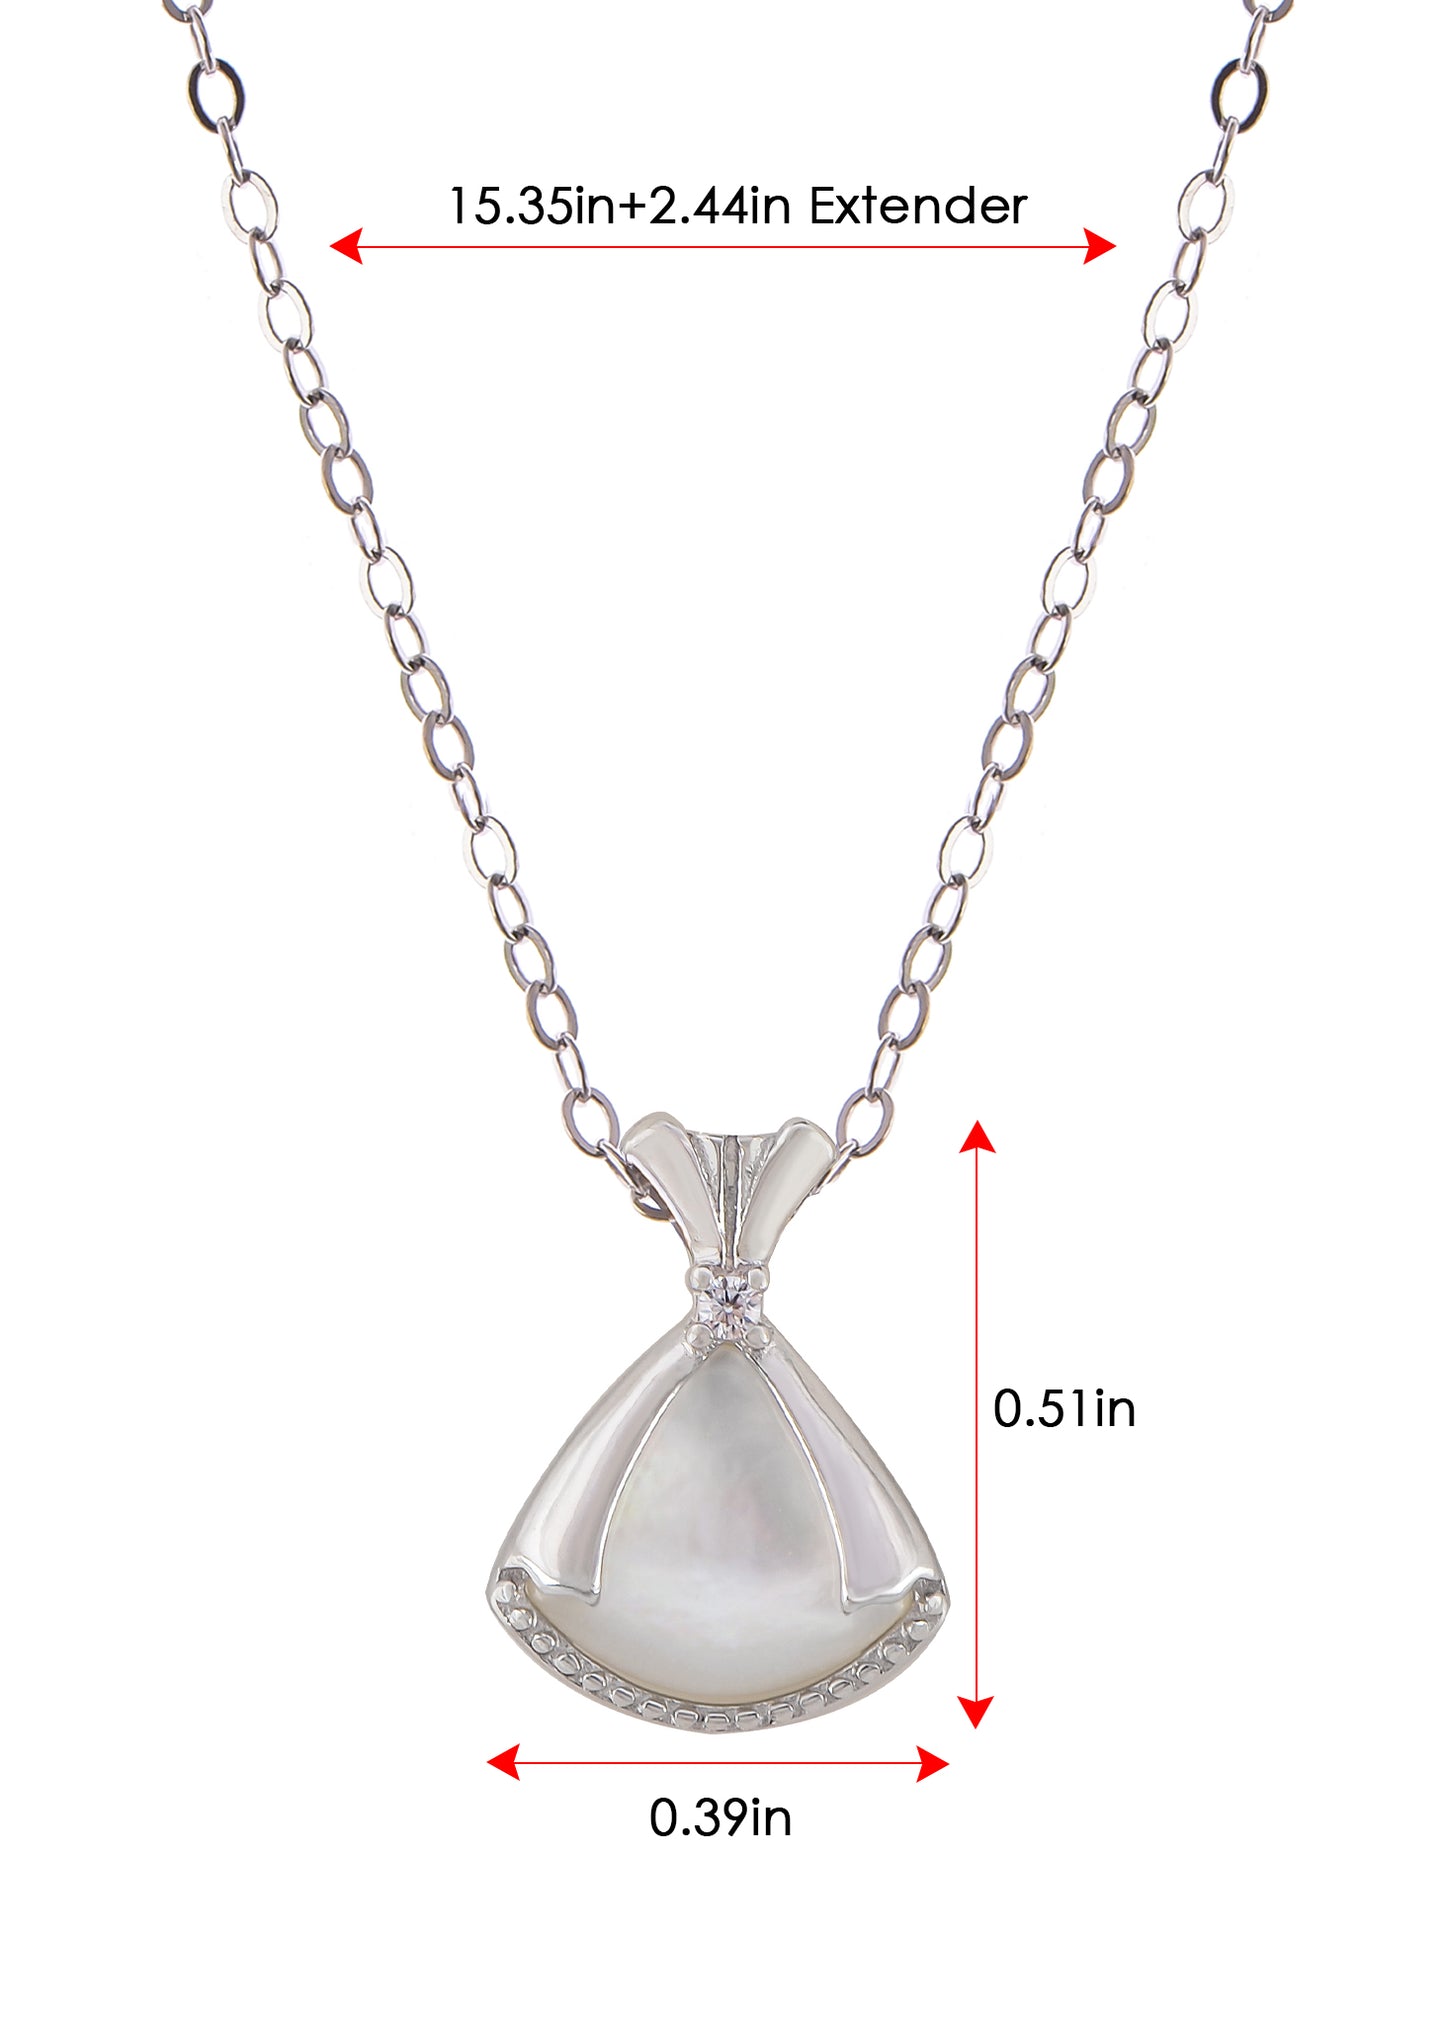 Alilang Sparkling Rhinestone Seashell Skirt Necklace - 925 Sterling Silver Fan Pendant Necklaces For Women